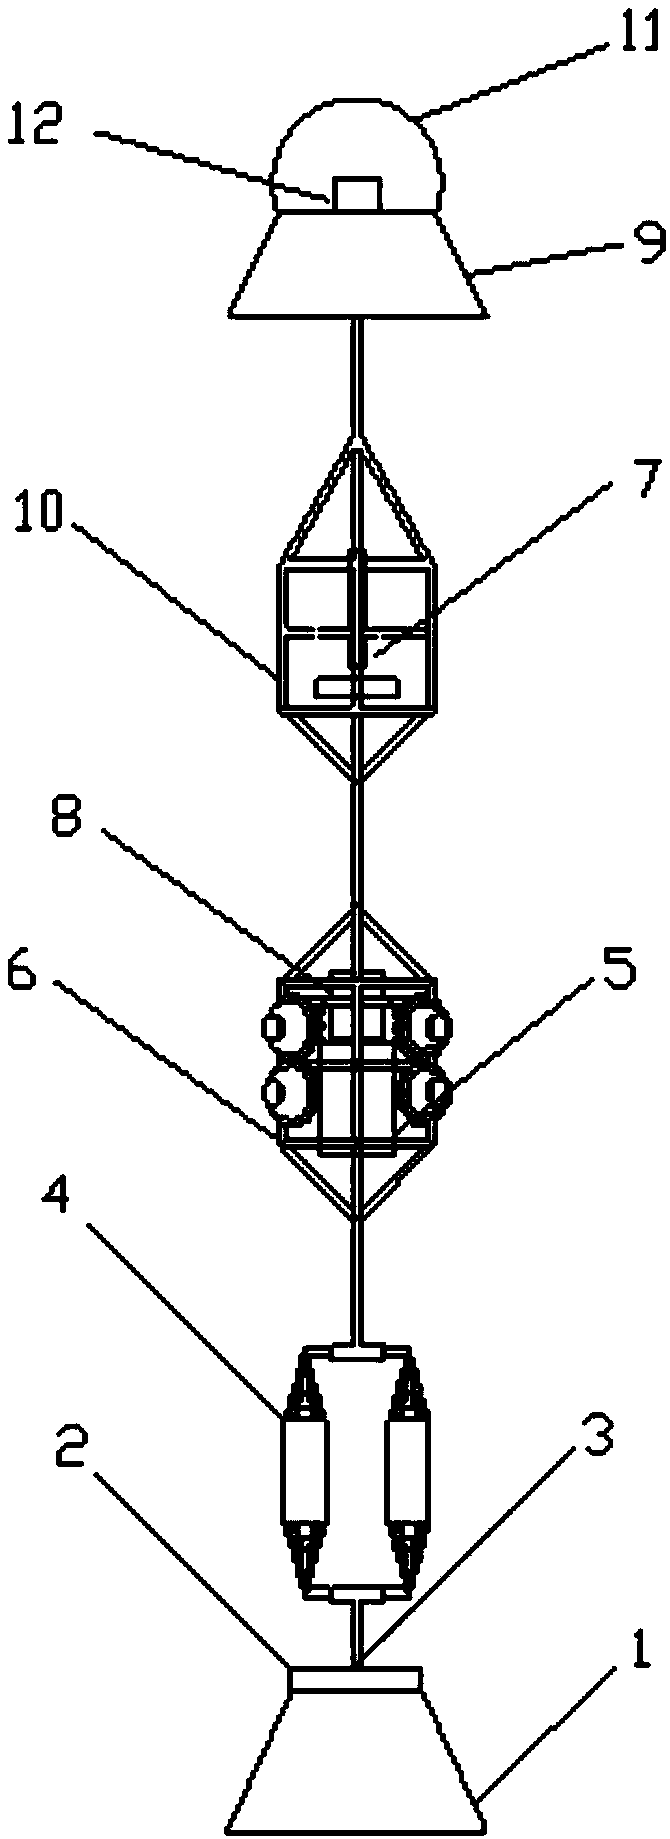 Device and method for in-situ real-time observation of seabed sand waves